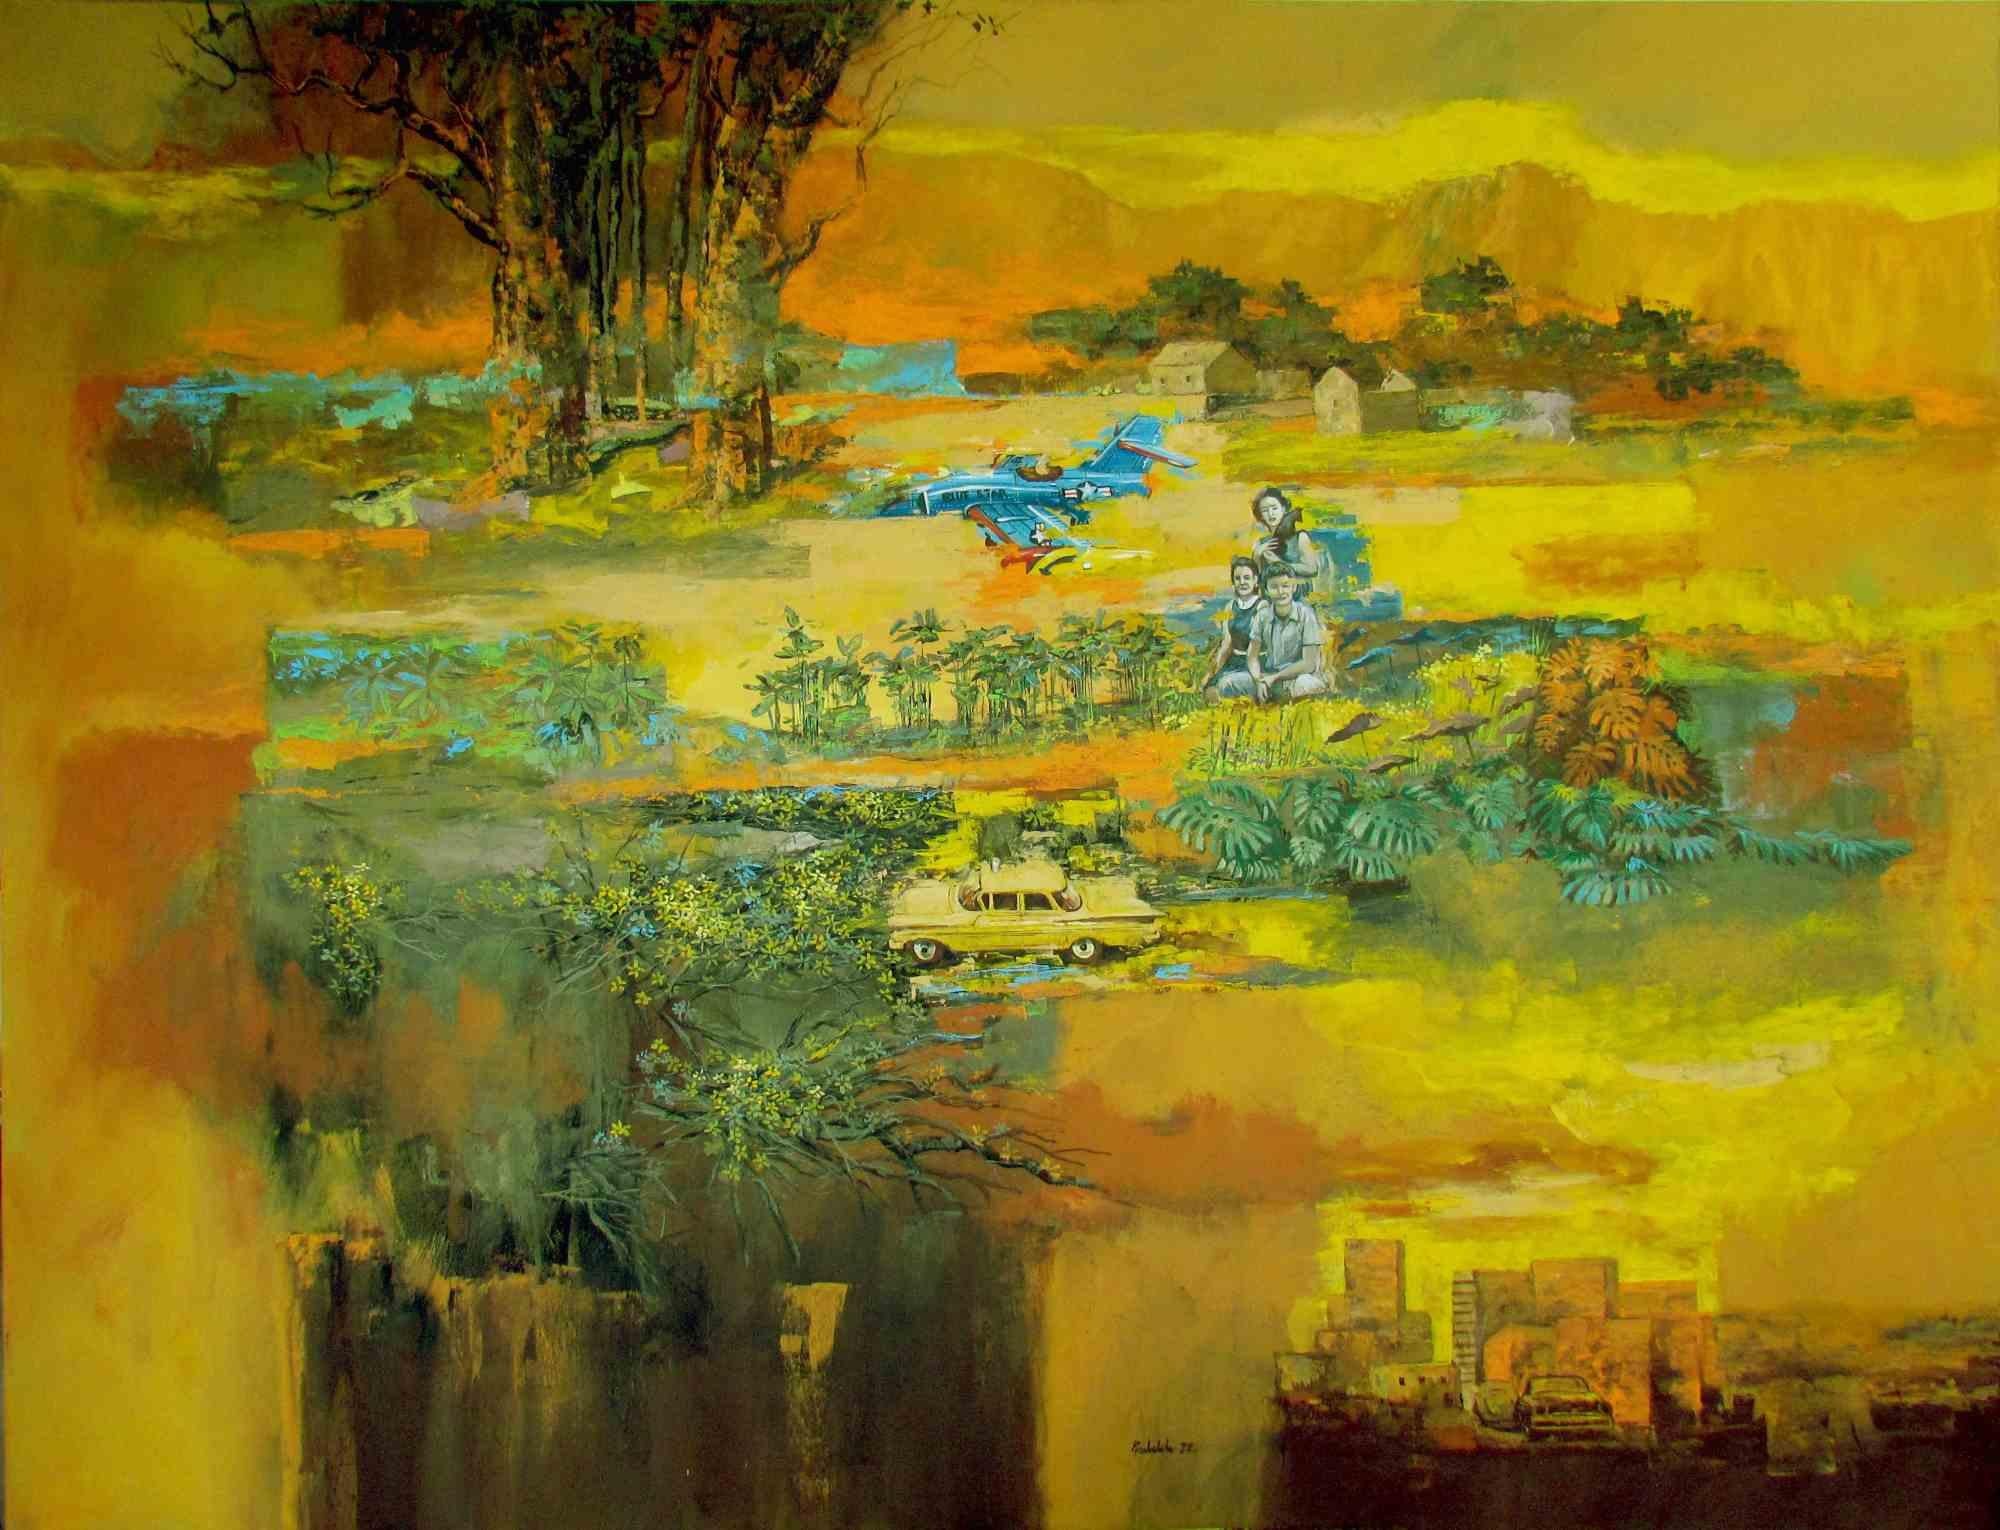  Acrylic painting by Juan Rodrigo Piedrahita Escobar, realized in 2022. "My art  is for get a peace and pleasing in painting world and gets an armory space,  and see the life until dead, with my landscape and abstraction could see the farway in this